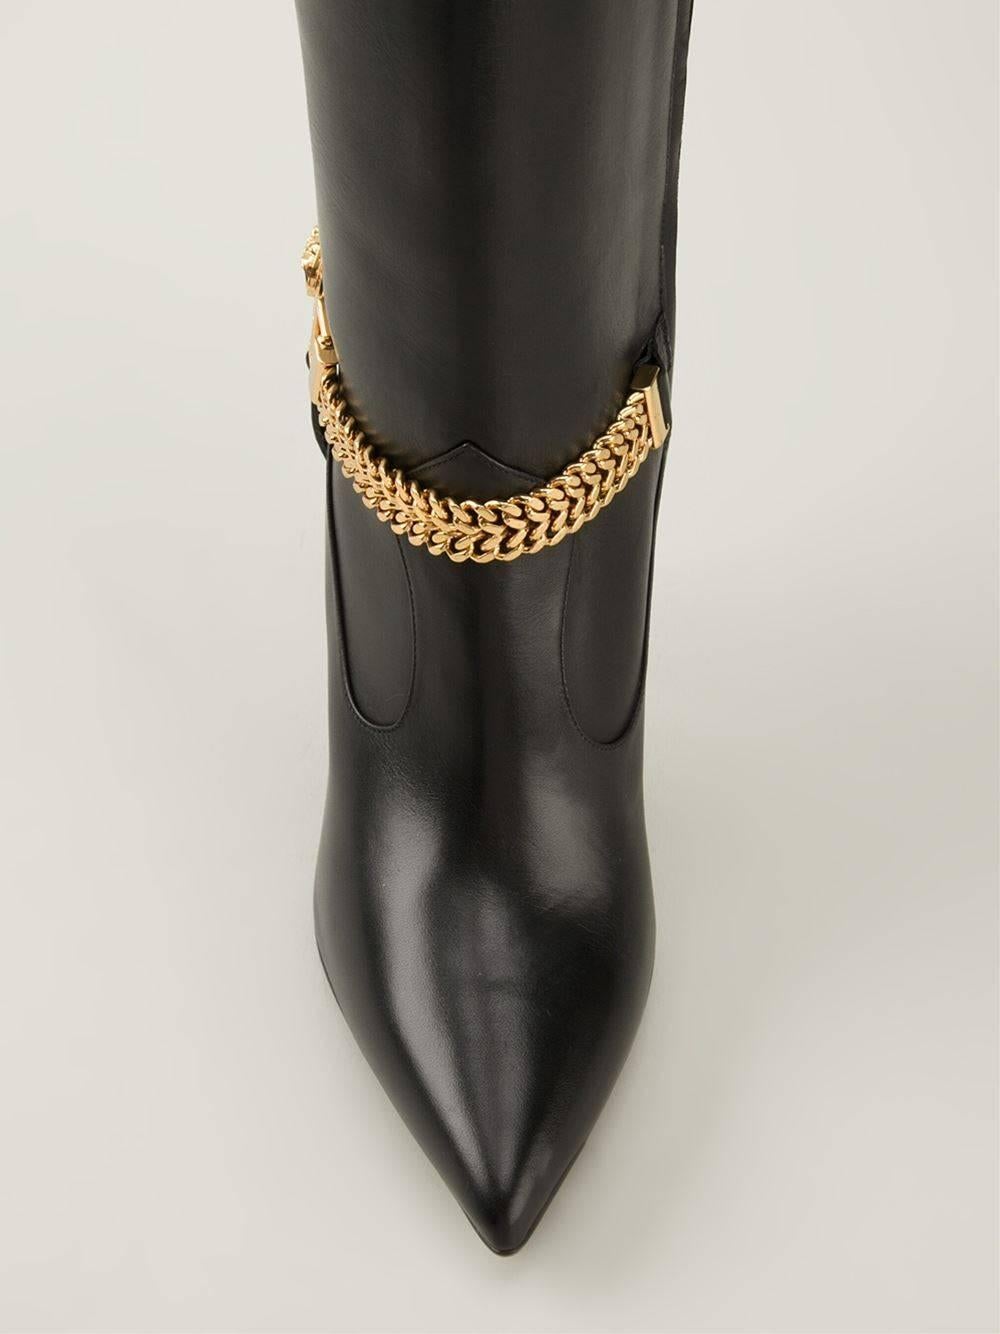 VERSACE BOOTS

Black calf leather Medusa knee high boots from Versace featuring 

a pointed toe, a knee length, a stiletto heel, a side zip fastening and 

a gold-tone chain with Medusa logo.

Made in Italy.

IT Size 36

Brand New, in